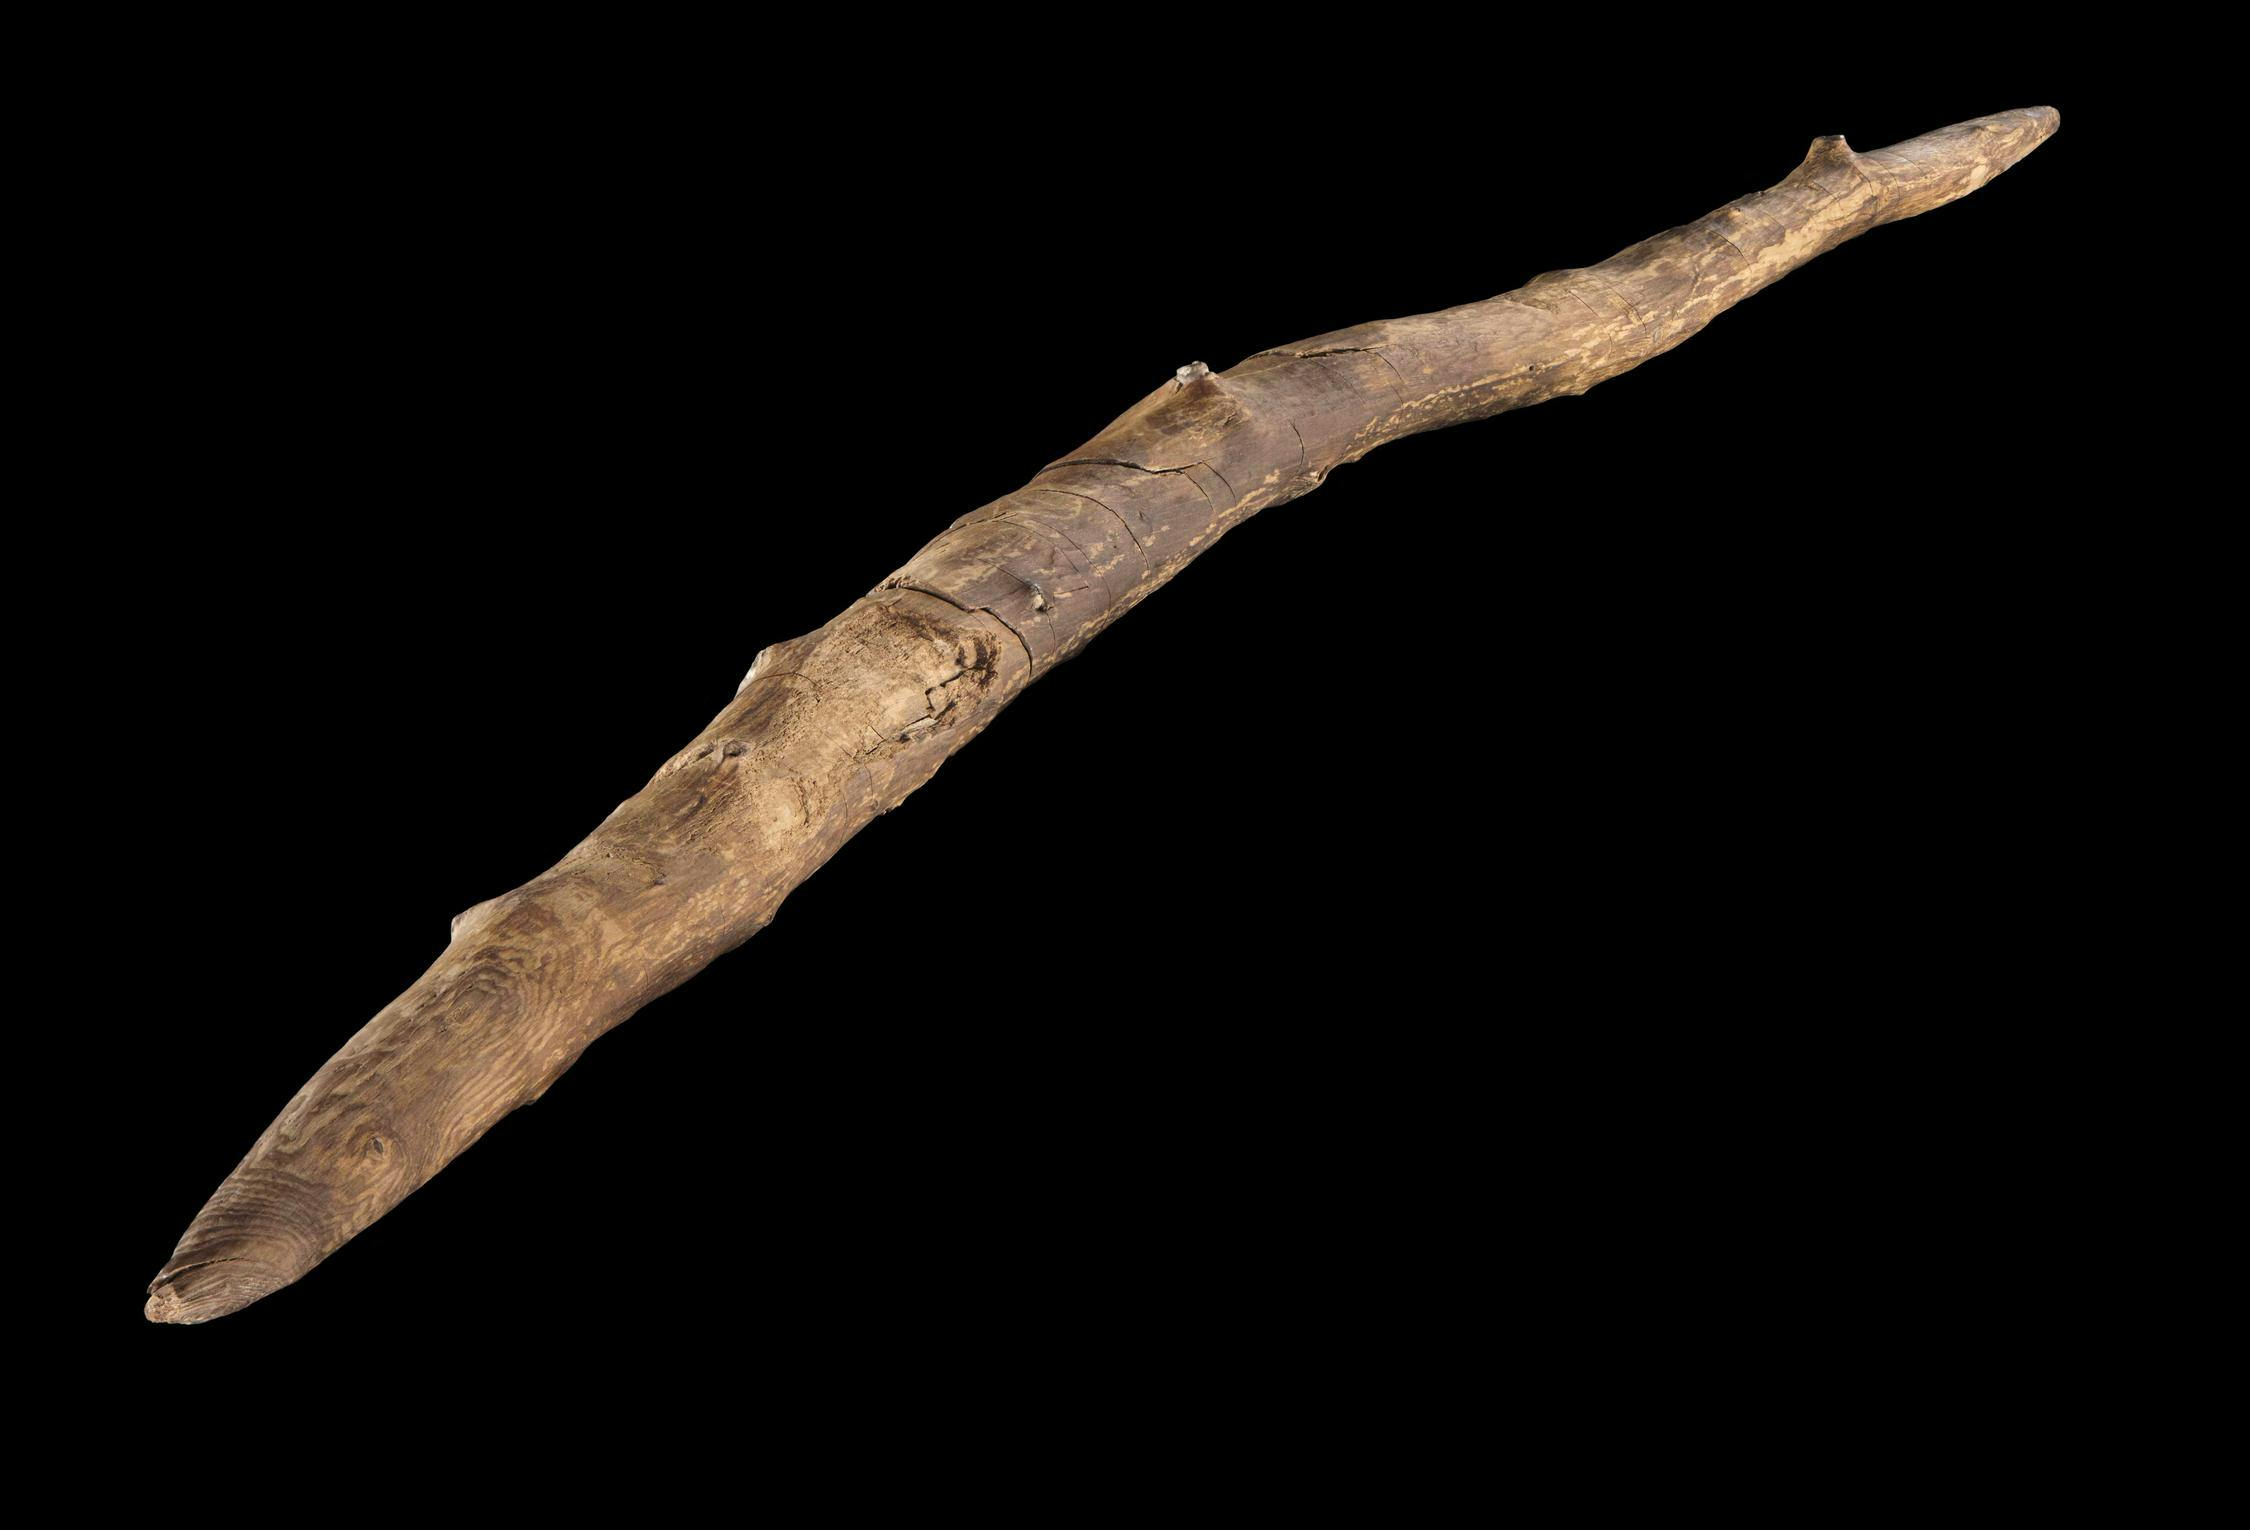 Double-pointed wooden throwing stick: perspective image | Image Credit: © Volker Minkus - CC BY 4.0